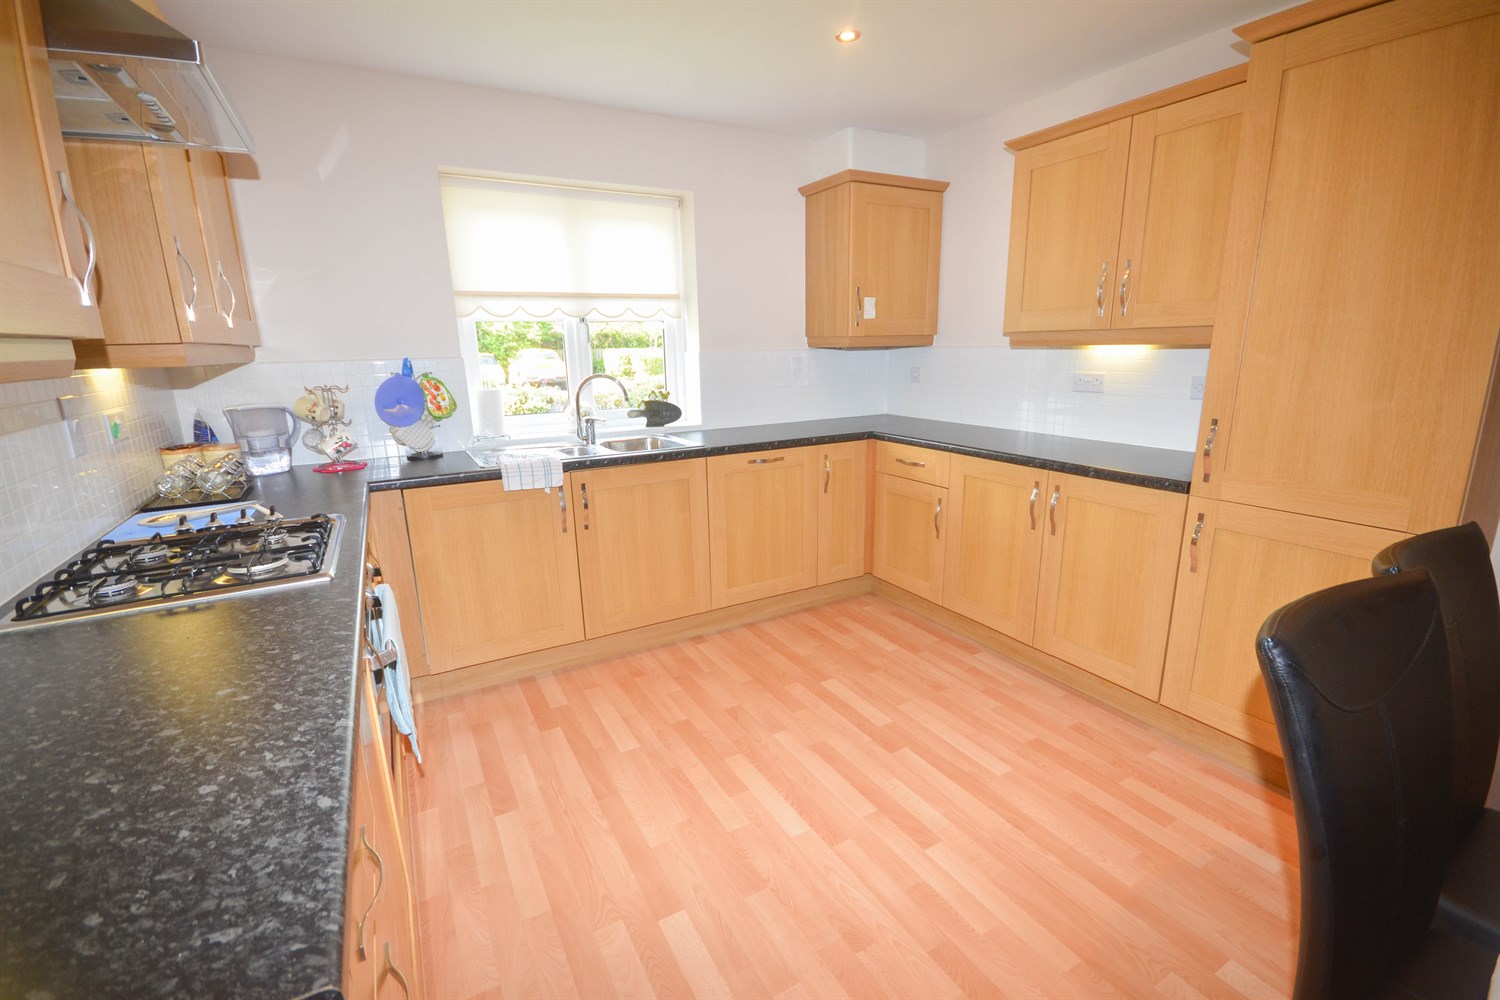 4 bed mid terraced town house for sale in Boldon, Tyne & Wear  - Property Image 2